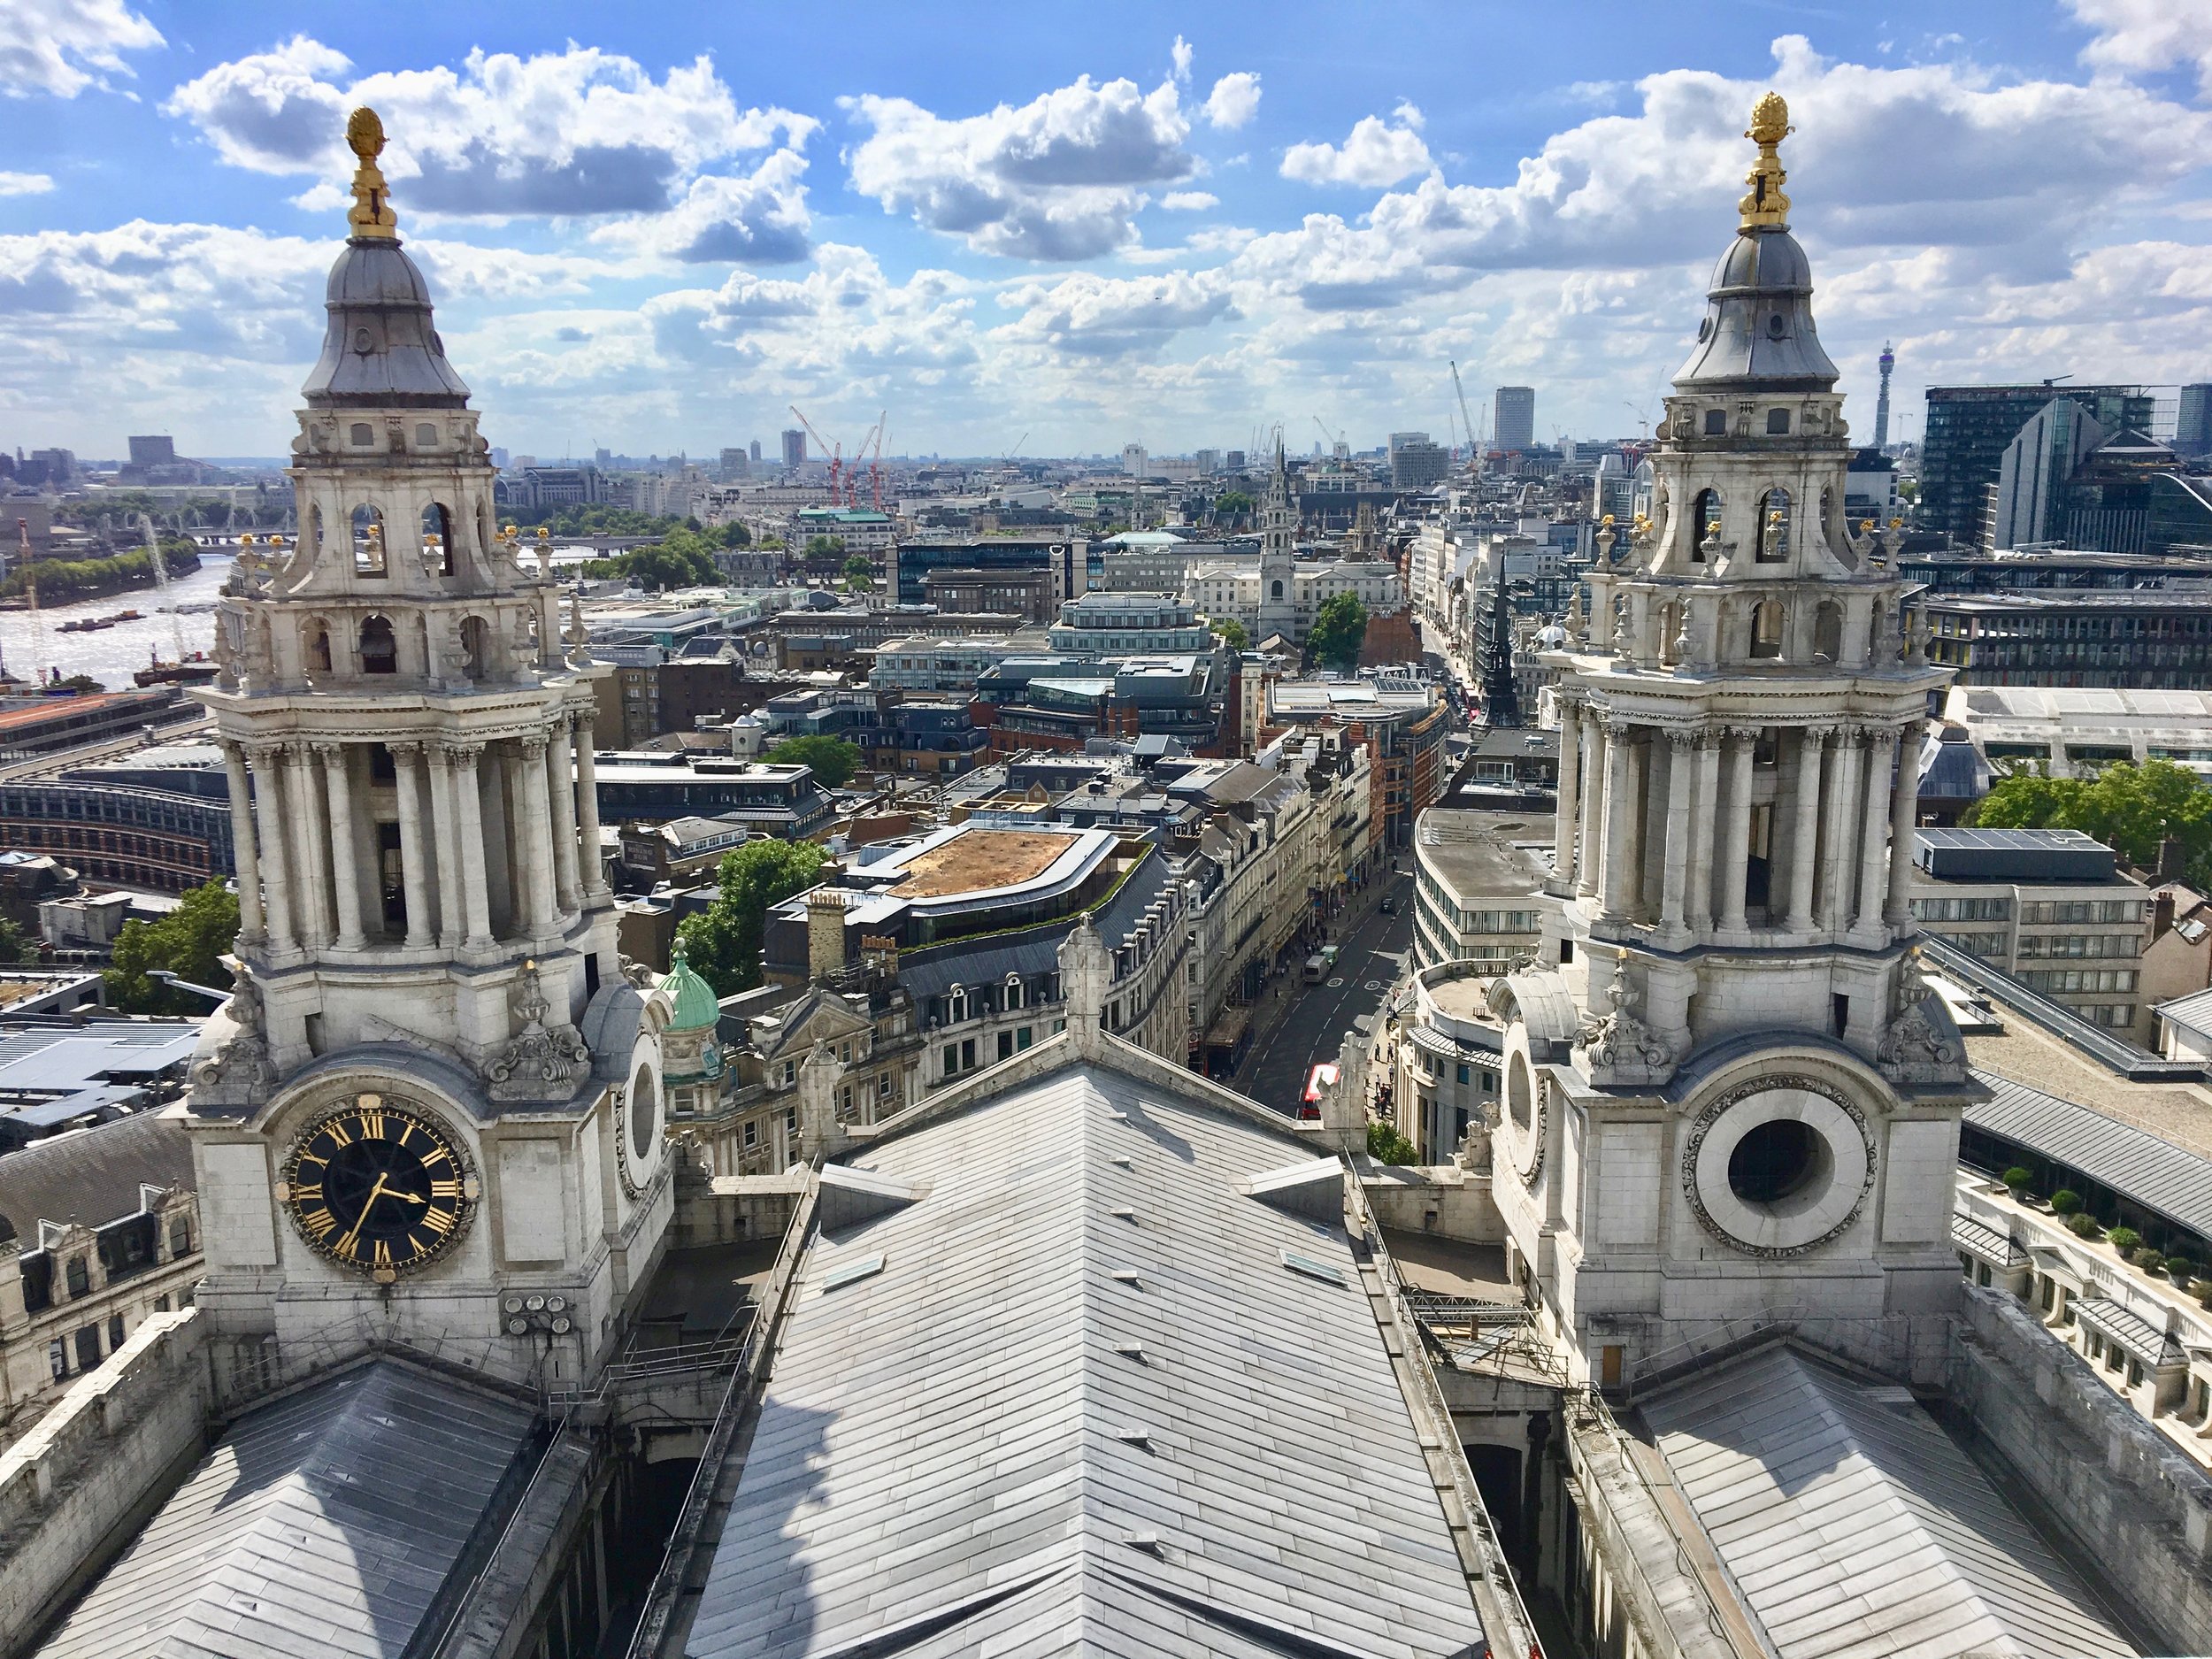 View from the dome of St Paul's Cathedral